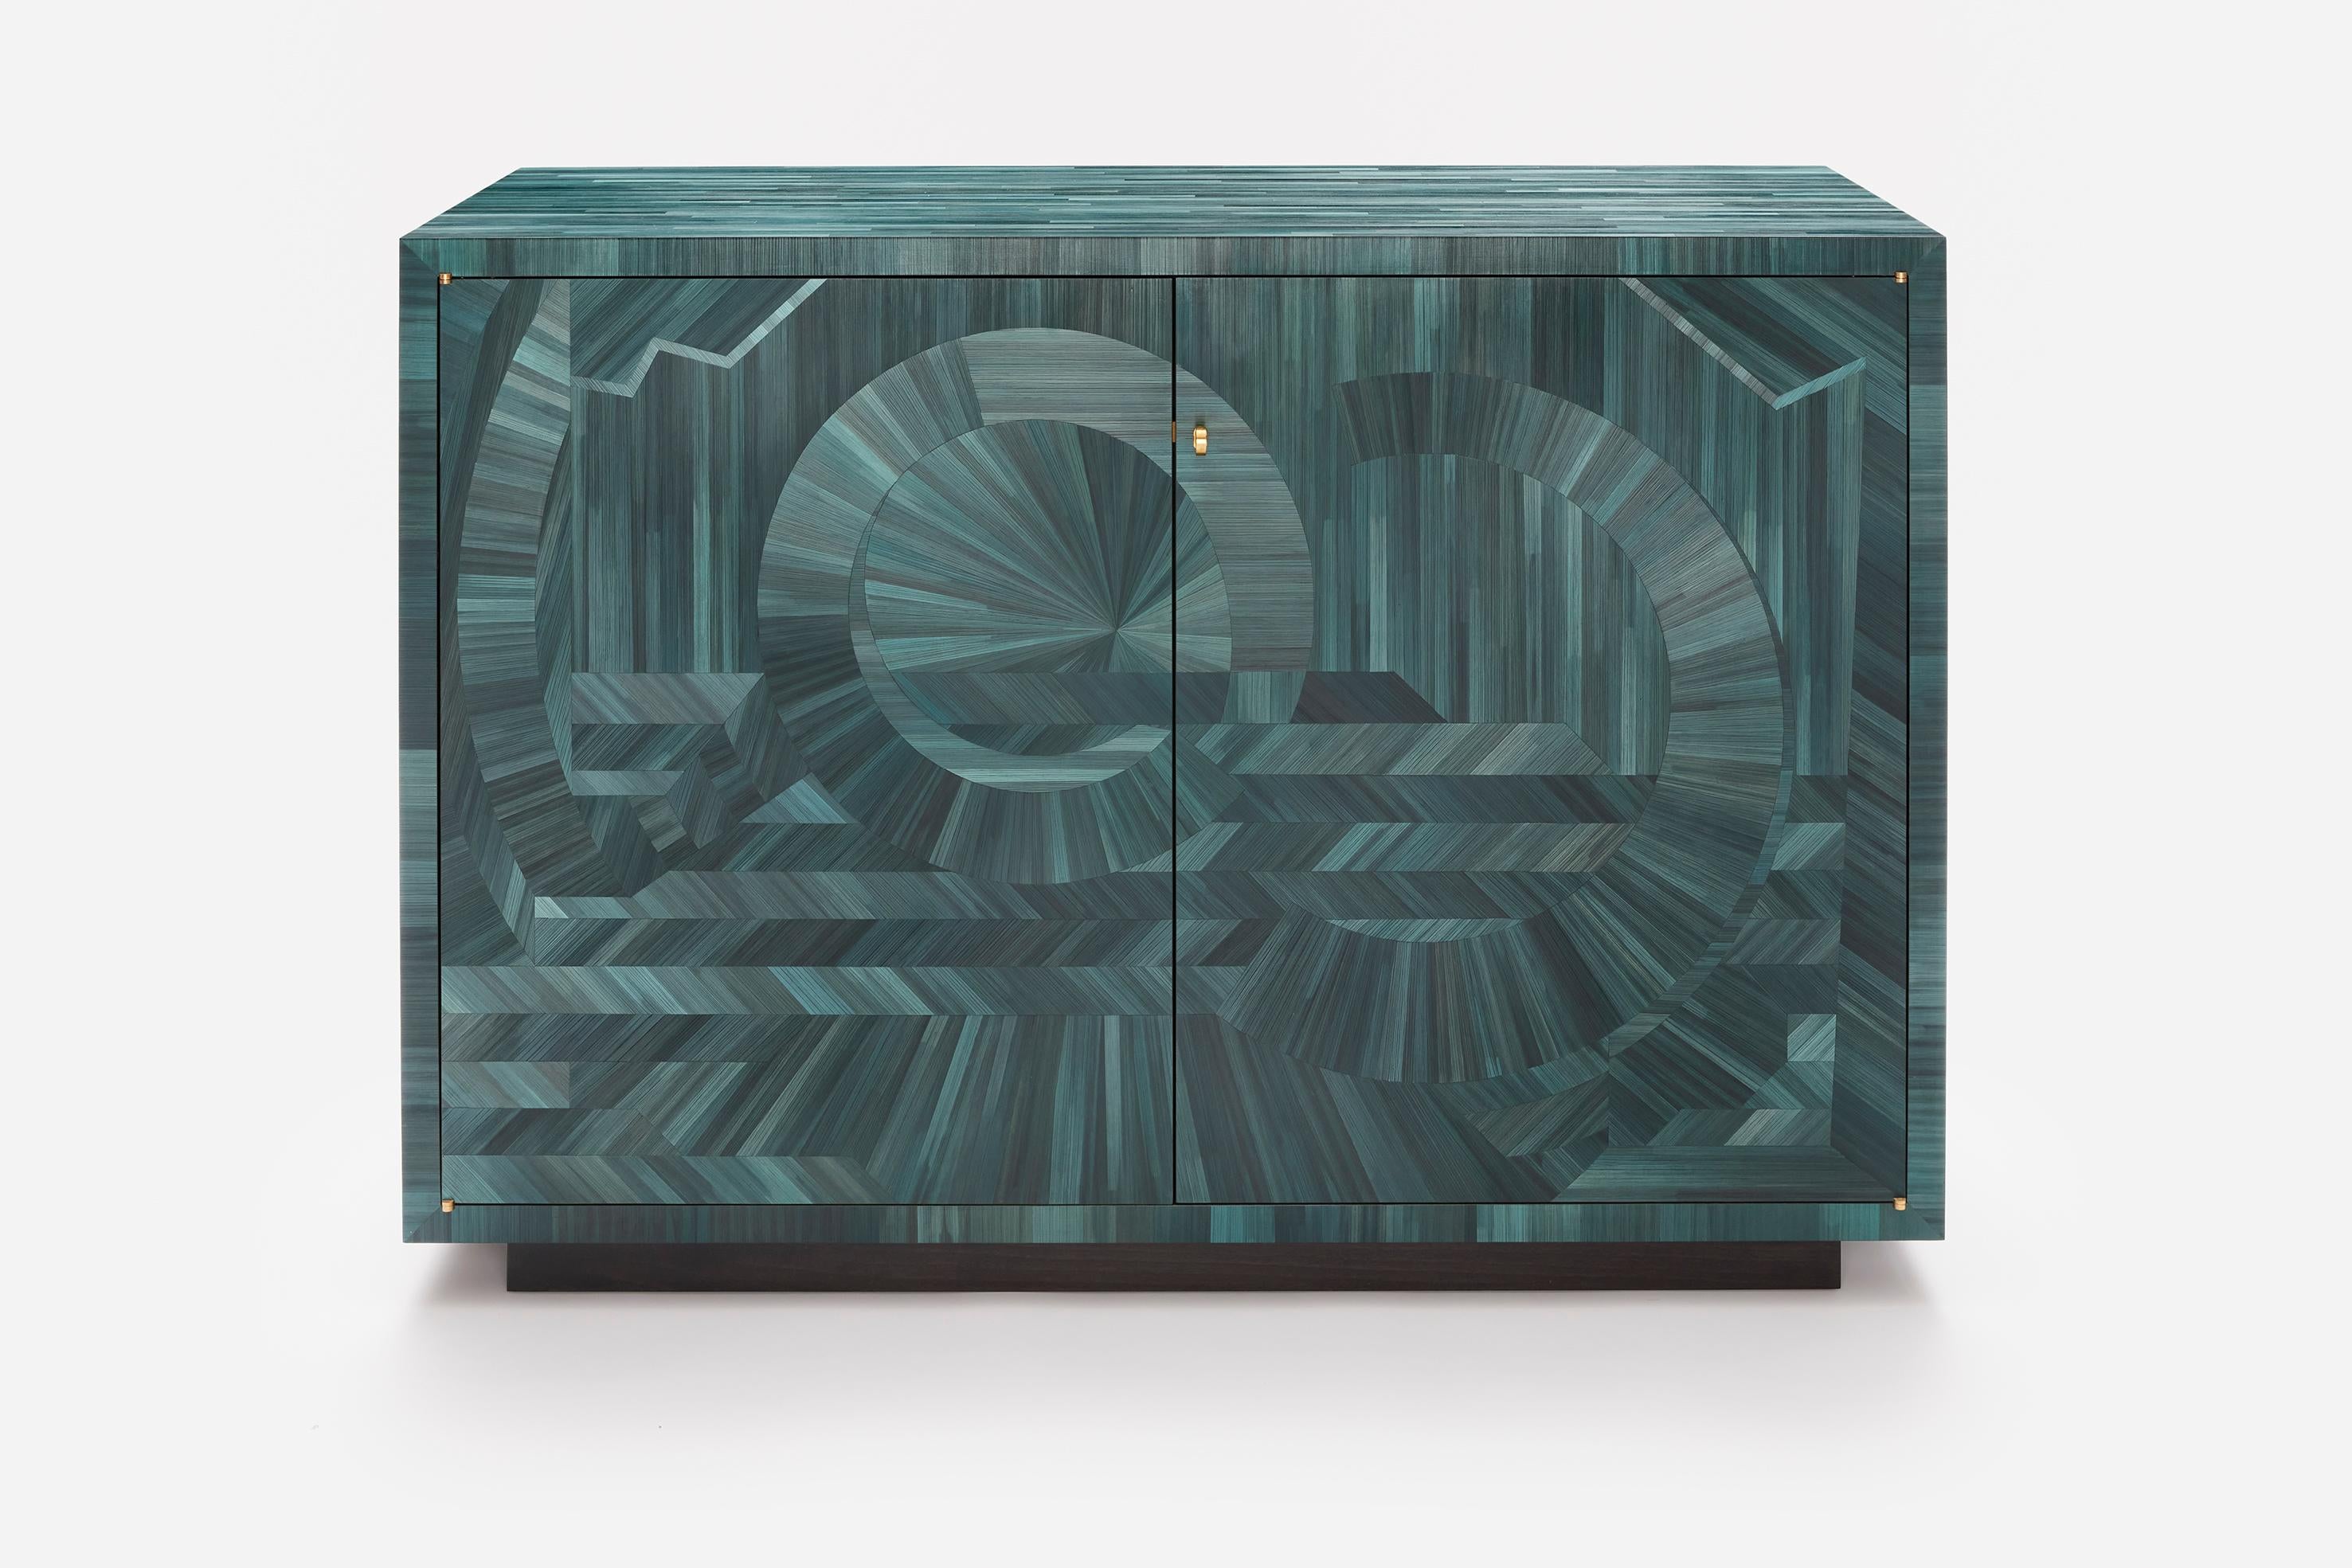 Abruzzo green straw Marquetry cabinet by Simon Orrell Design
 Measures: Width 120cm Depth 45cm Height 83cm
Dimension can be customized according to specific needs. 
Finish: Straw Marquetry - Interiors in dark American Walnut with single